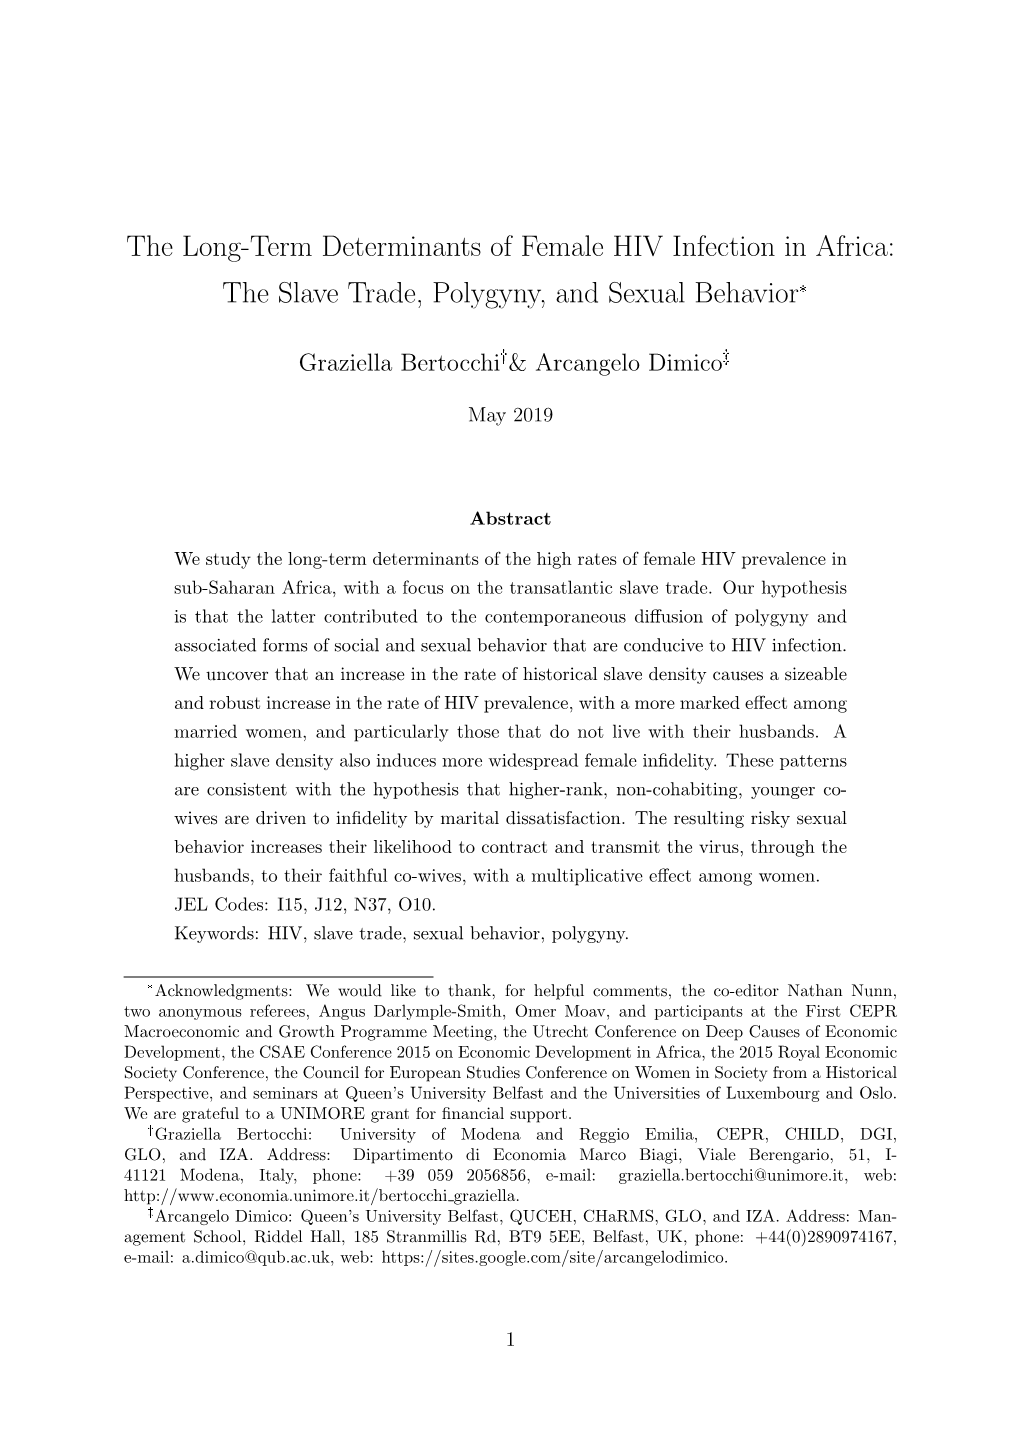 The Long-Term Determinants of Female HIV Infection in Africa: the Slave Trade, Polygyny, and Sexual Behavior*